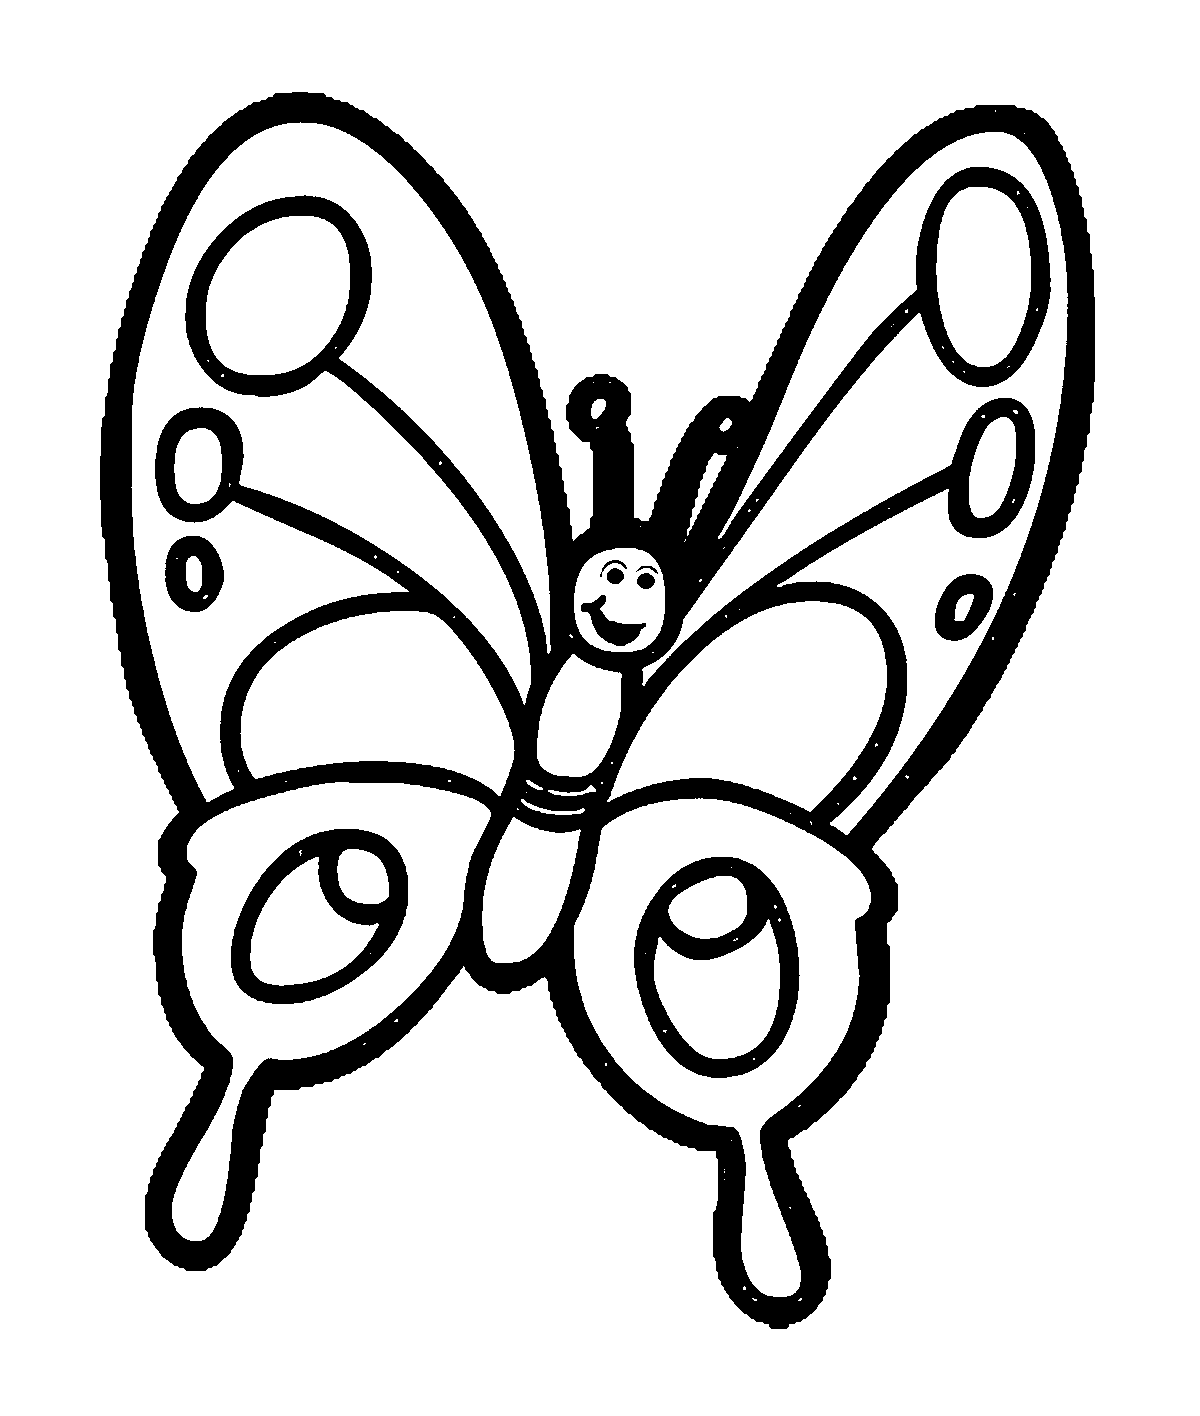 Butterfly black and white cartoonbutterfly coloring page